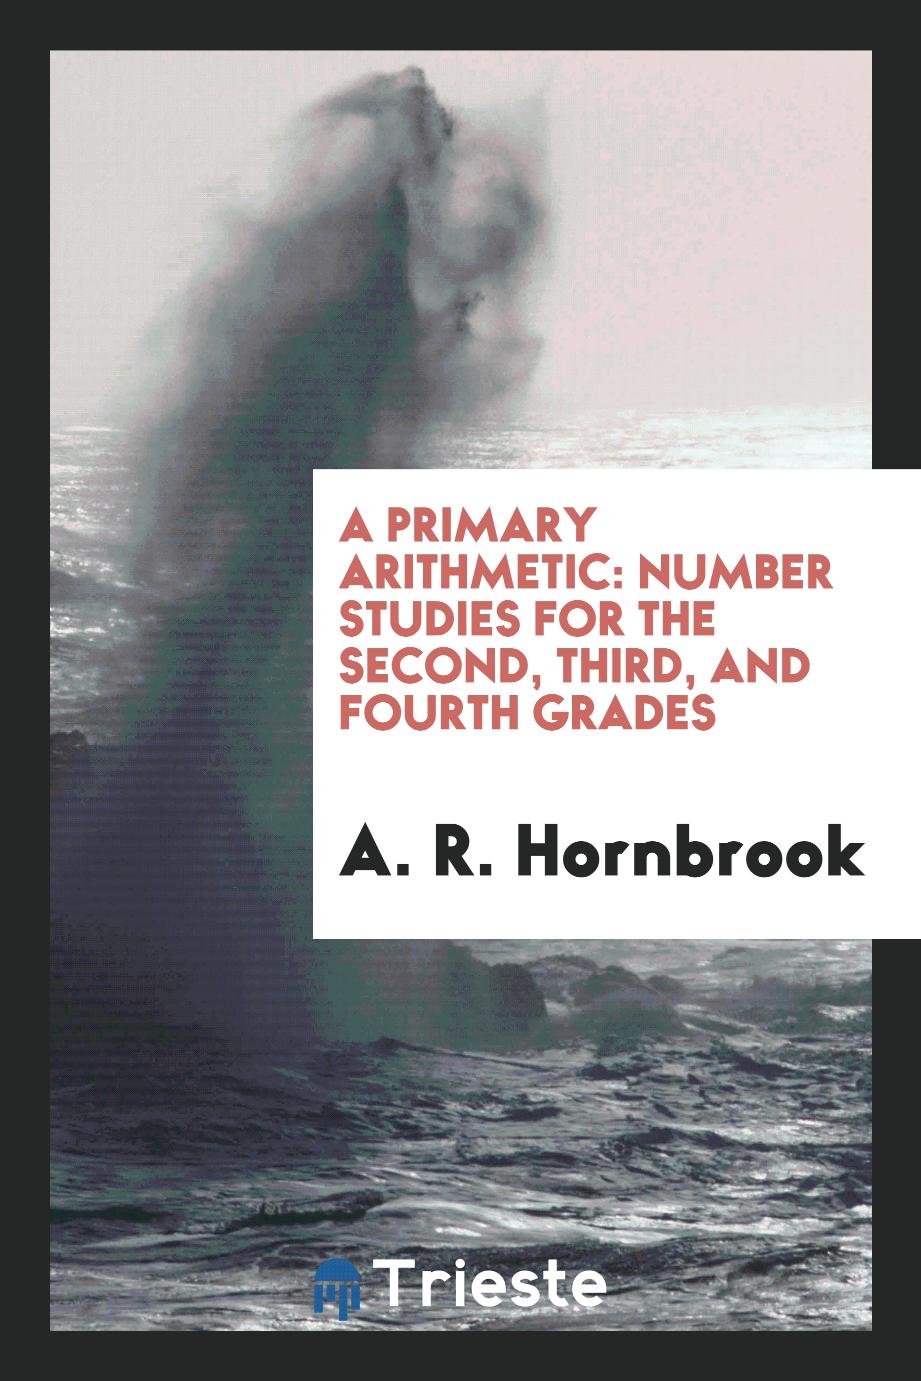 A primary arithmetic: number studies for the second, third, and fourth grades